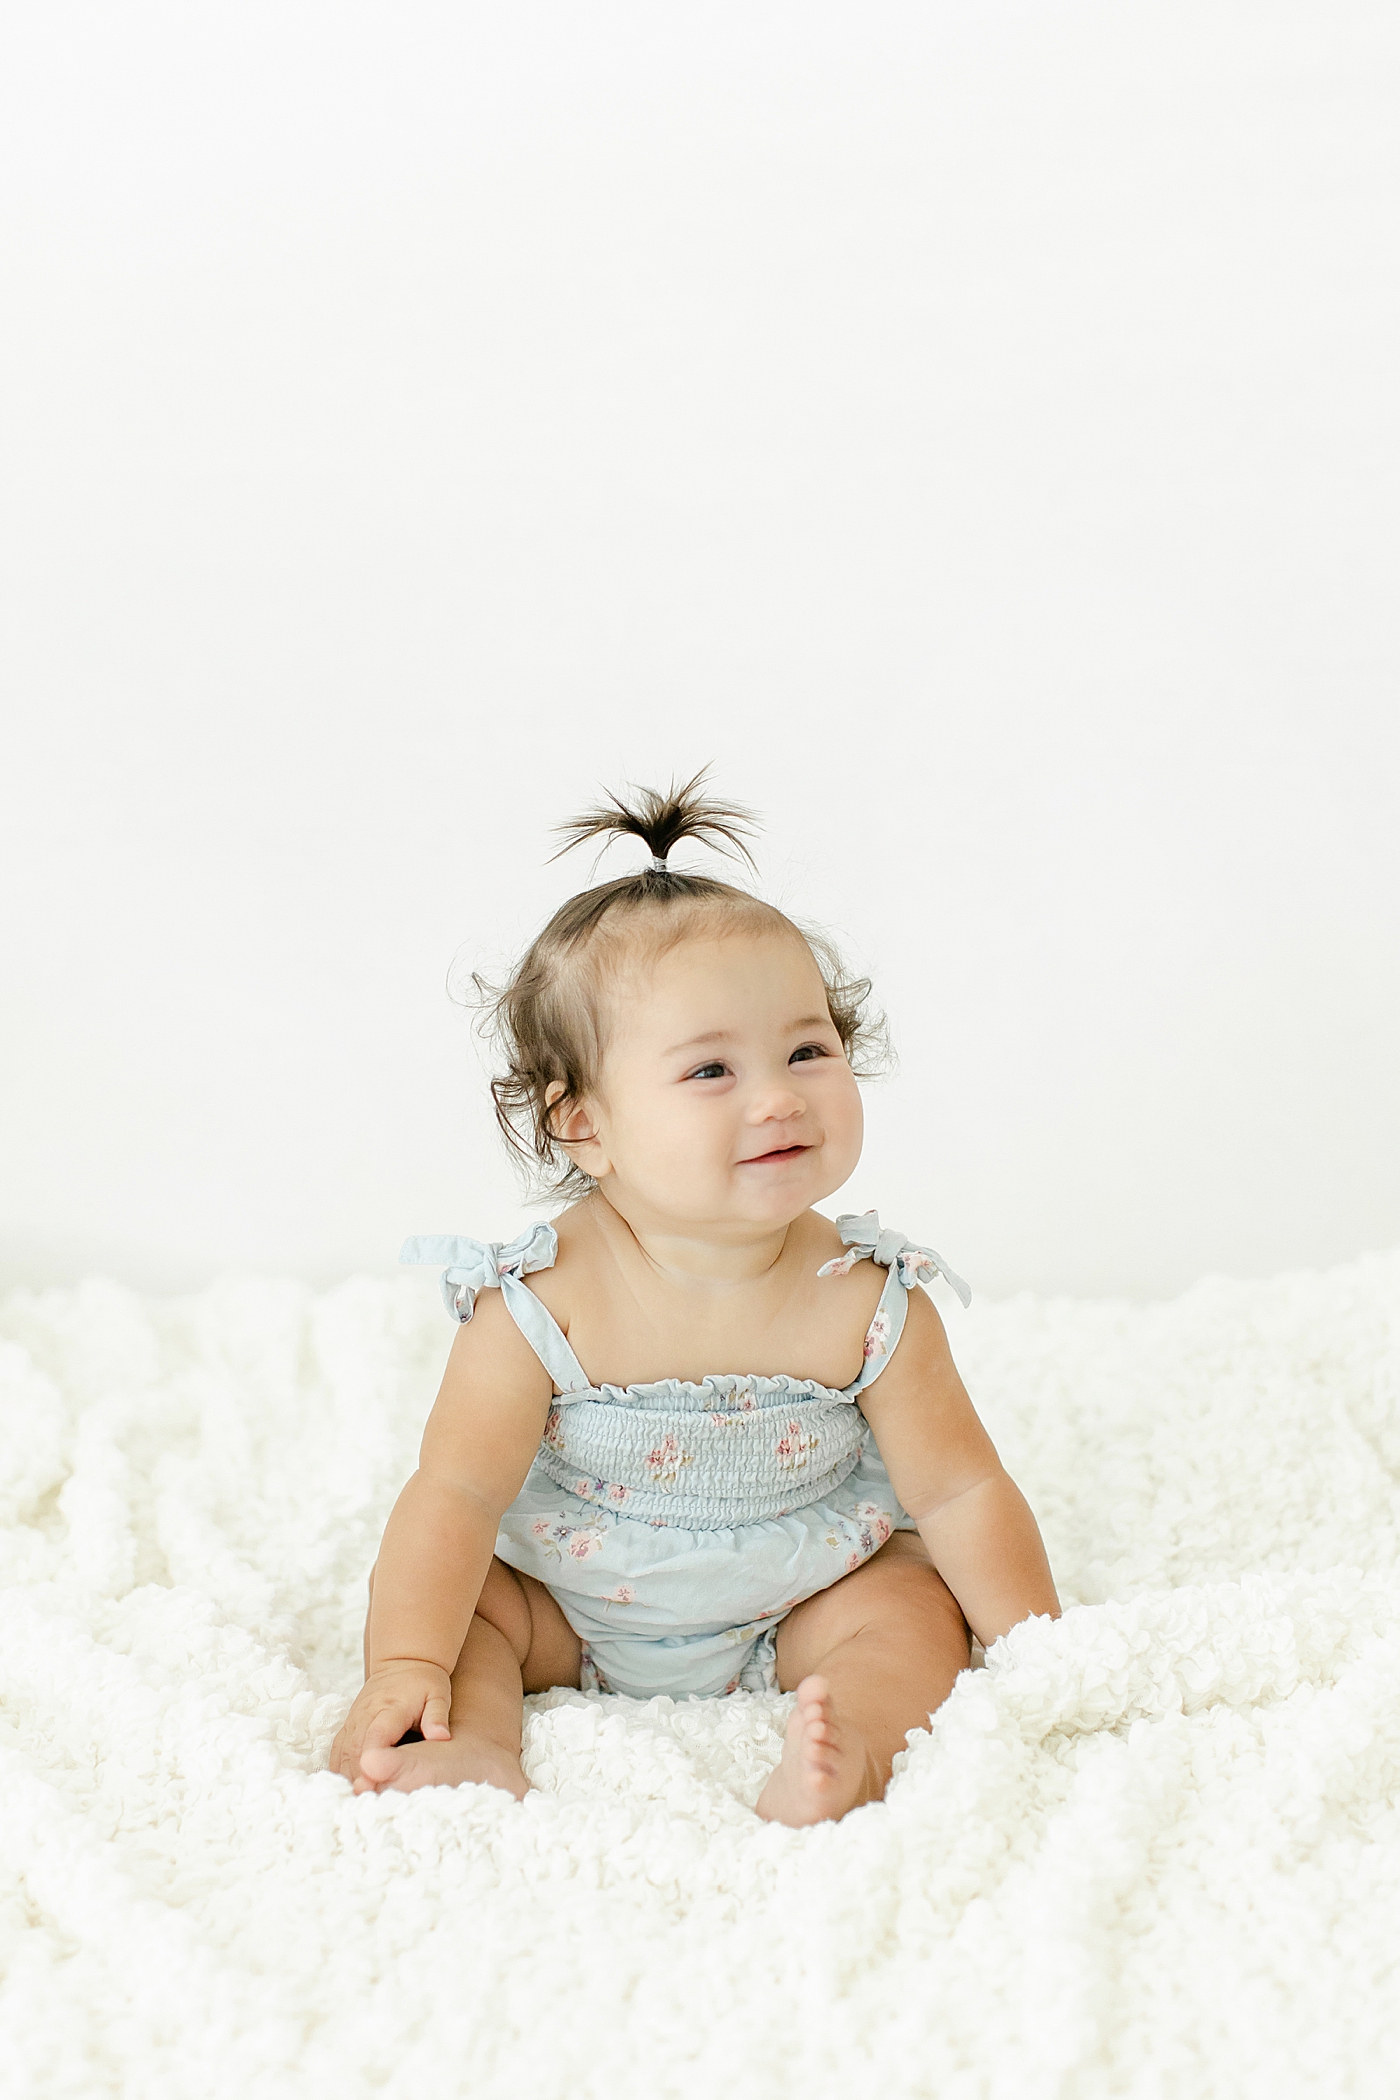 Smiling baby girl in a blue jumper during her Six Month Studio Session | Image by Chrissy Winchester Photography